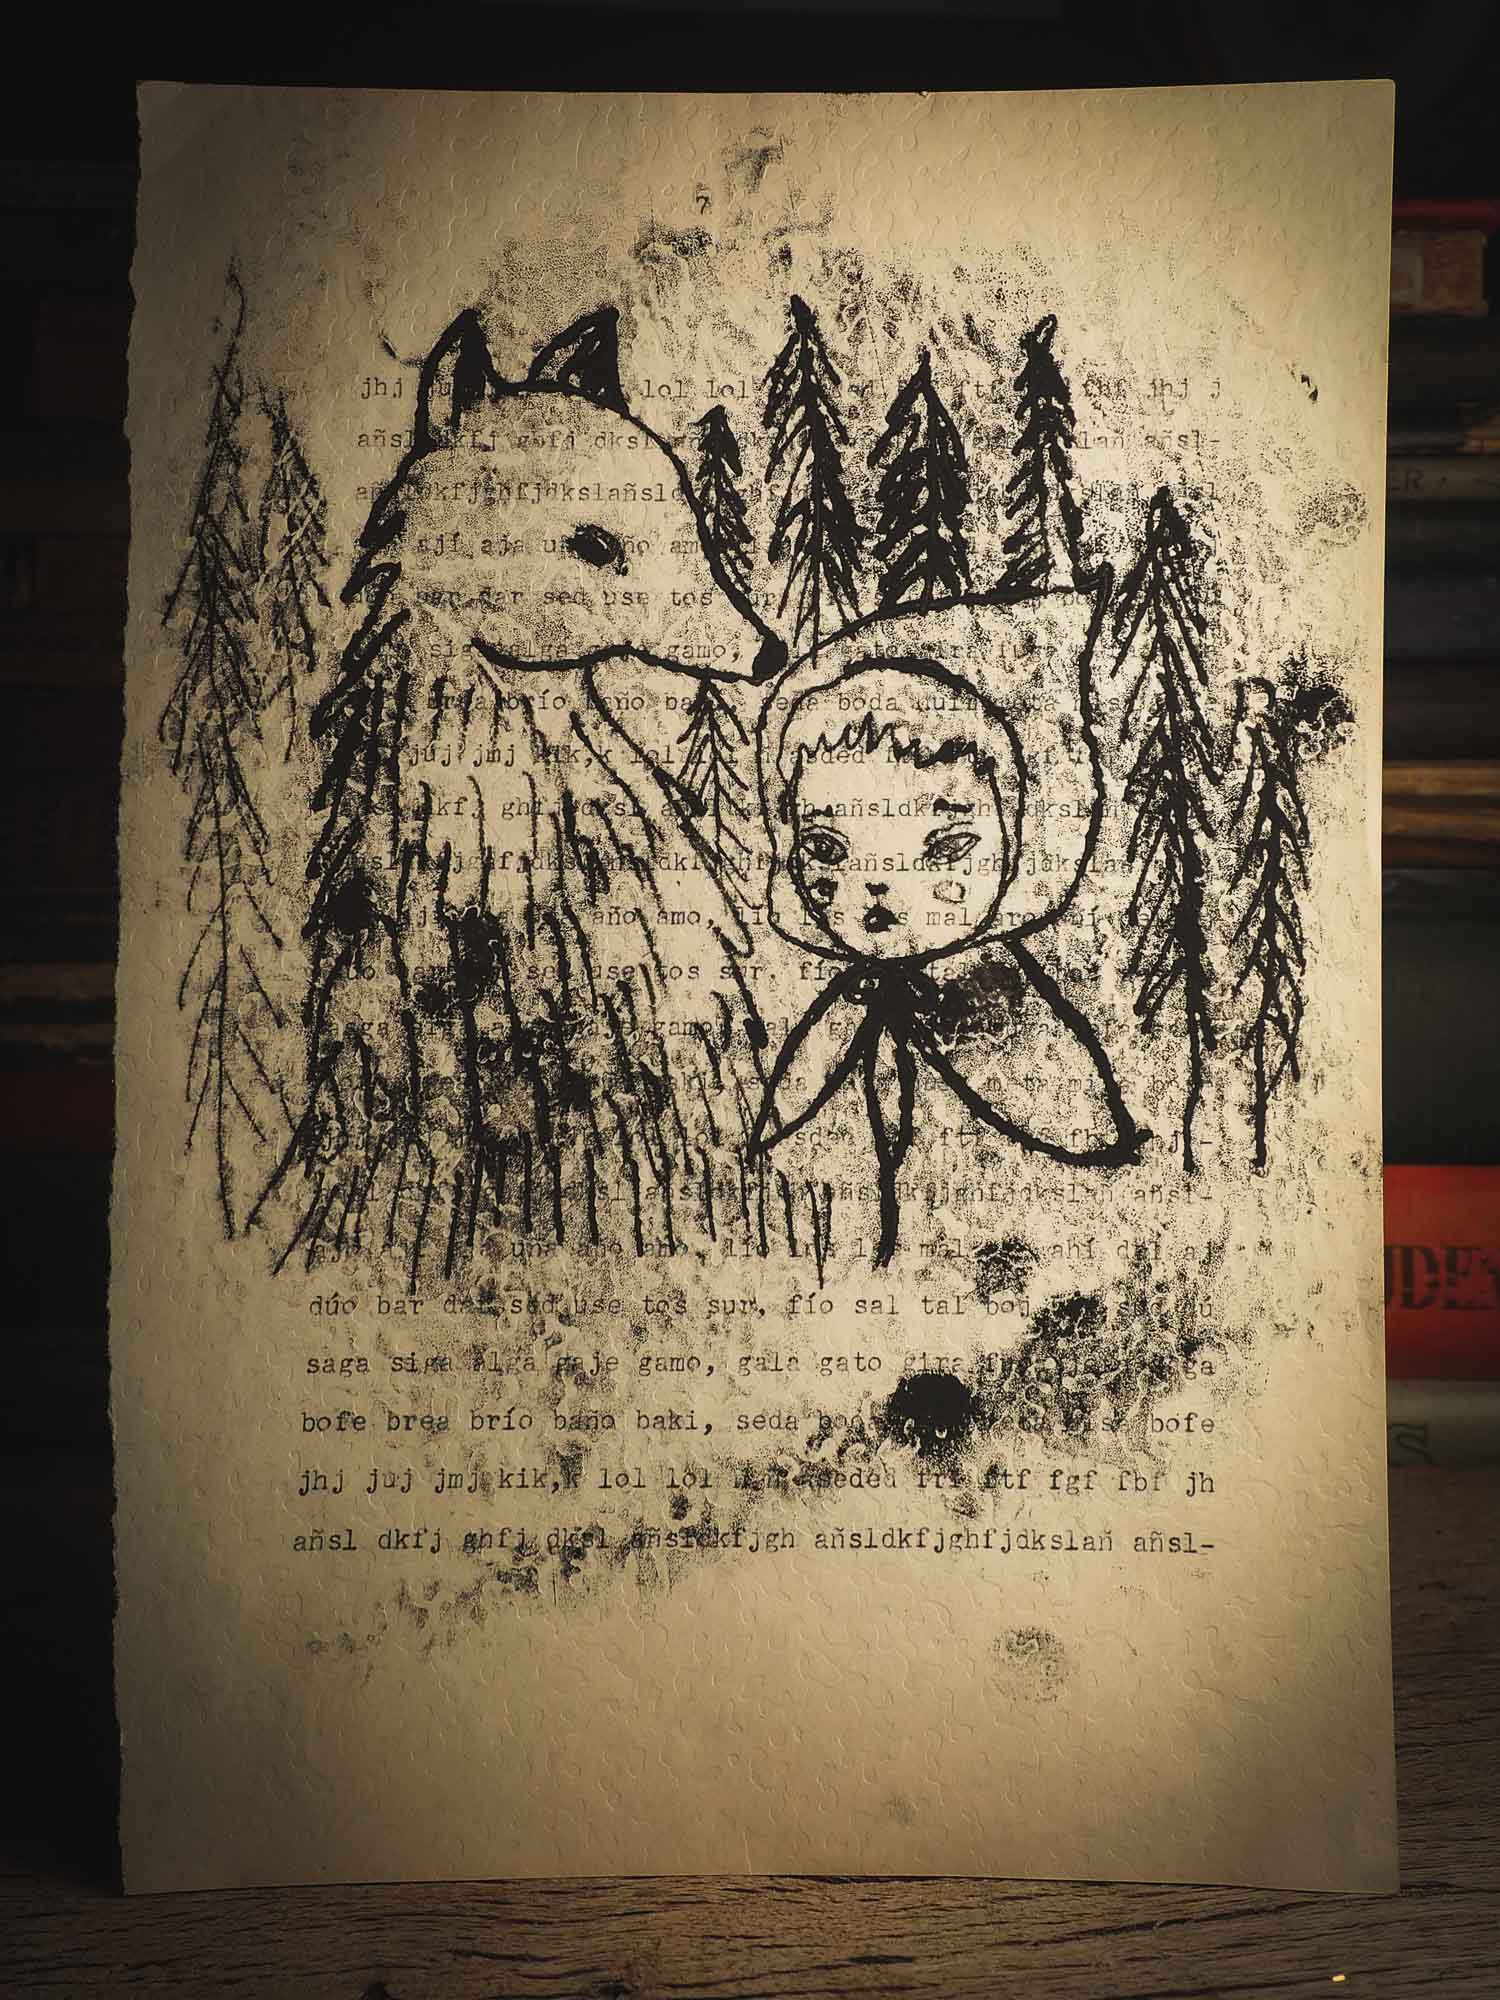 An original ink monoprint by Idania Salcido (Danita Art), this painting measures 7 x 11 inches on a fancy paper with mechanography exercises, dated from early 20th century. In my world, Little Red Riding Hood and The Wolf are friends and companions that play in the deep forest, where no one can bother them. No hunters, No annoying chores, just pure fun in nature.